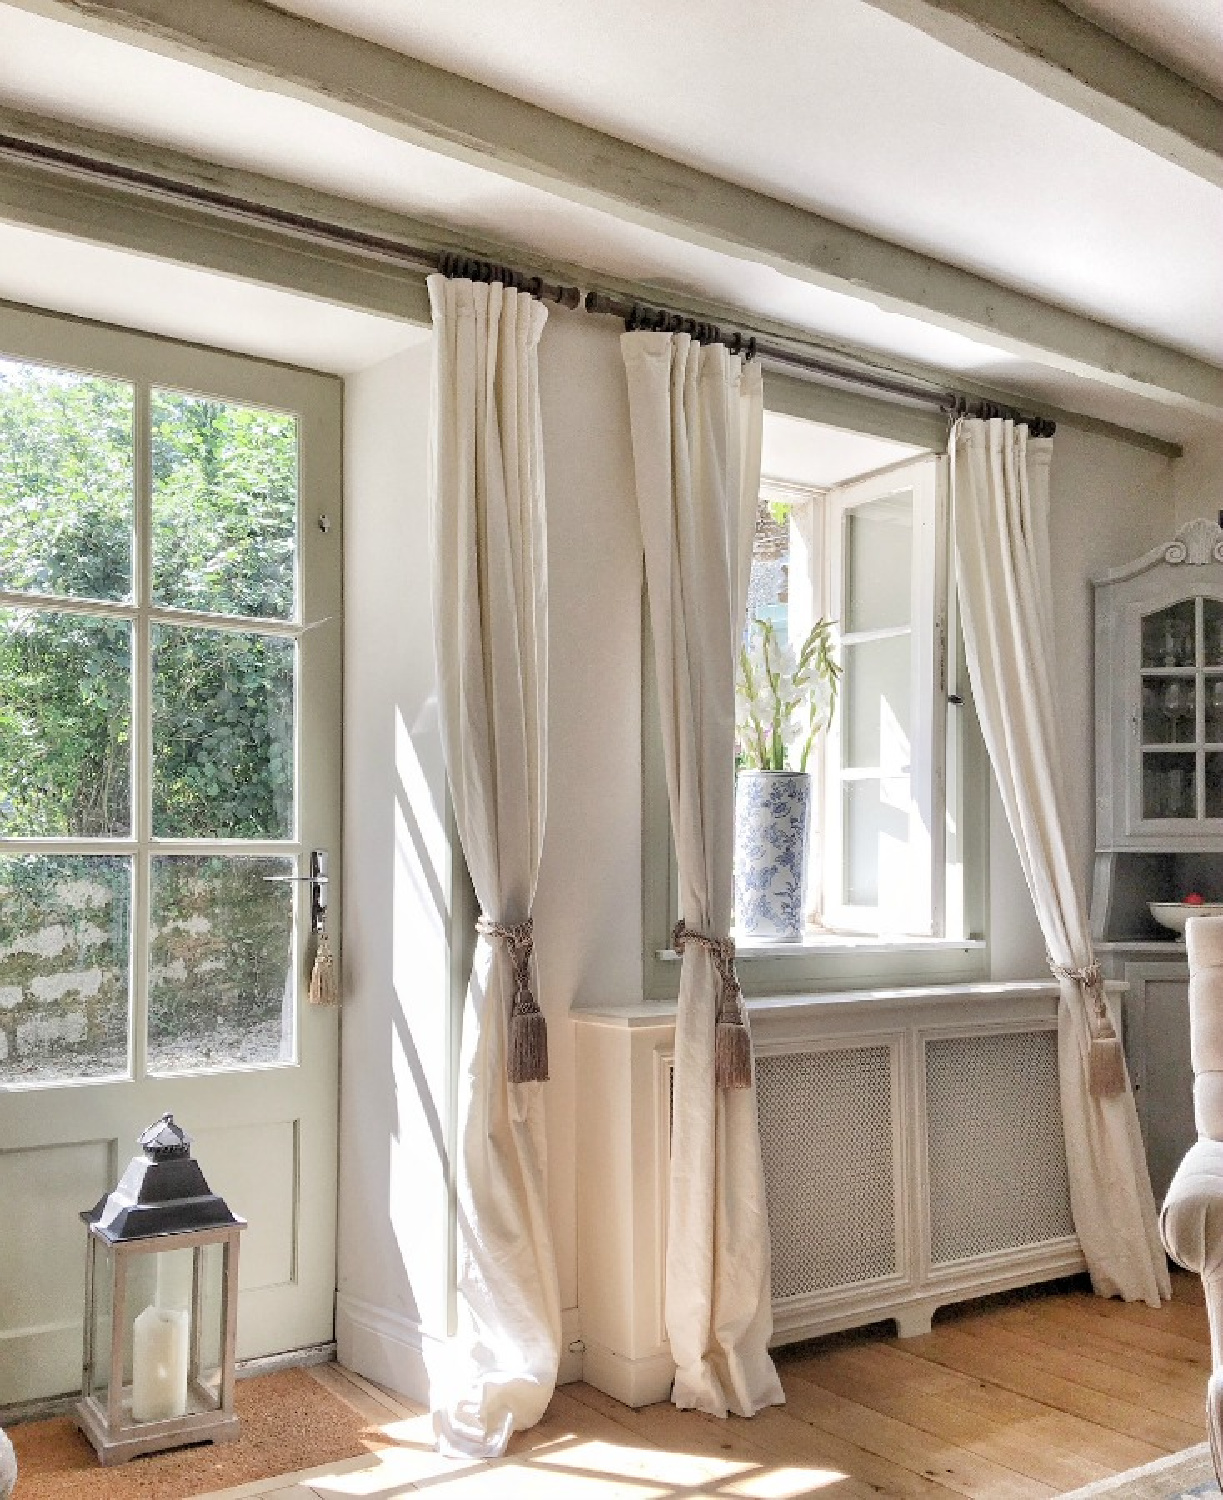 Farrow & Ball Strong White and French Gray in a French farmhouse living room and Vivi et Margot house tour of authentic French country interiors. #frenchfarmhouse #living rooms